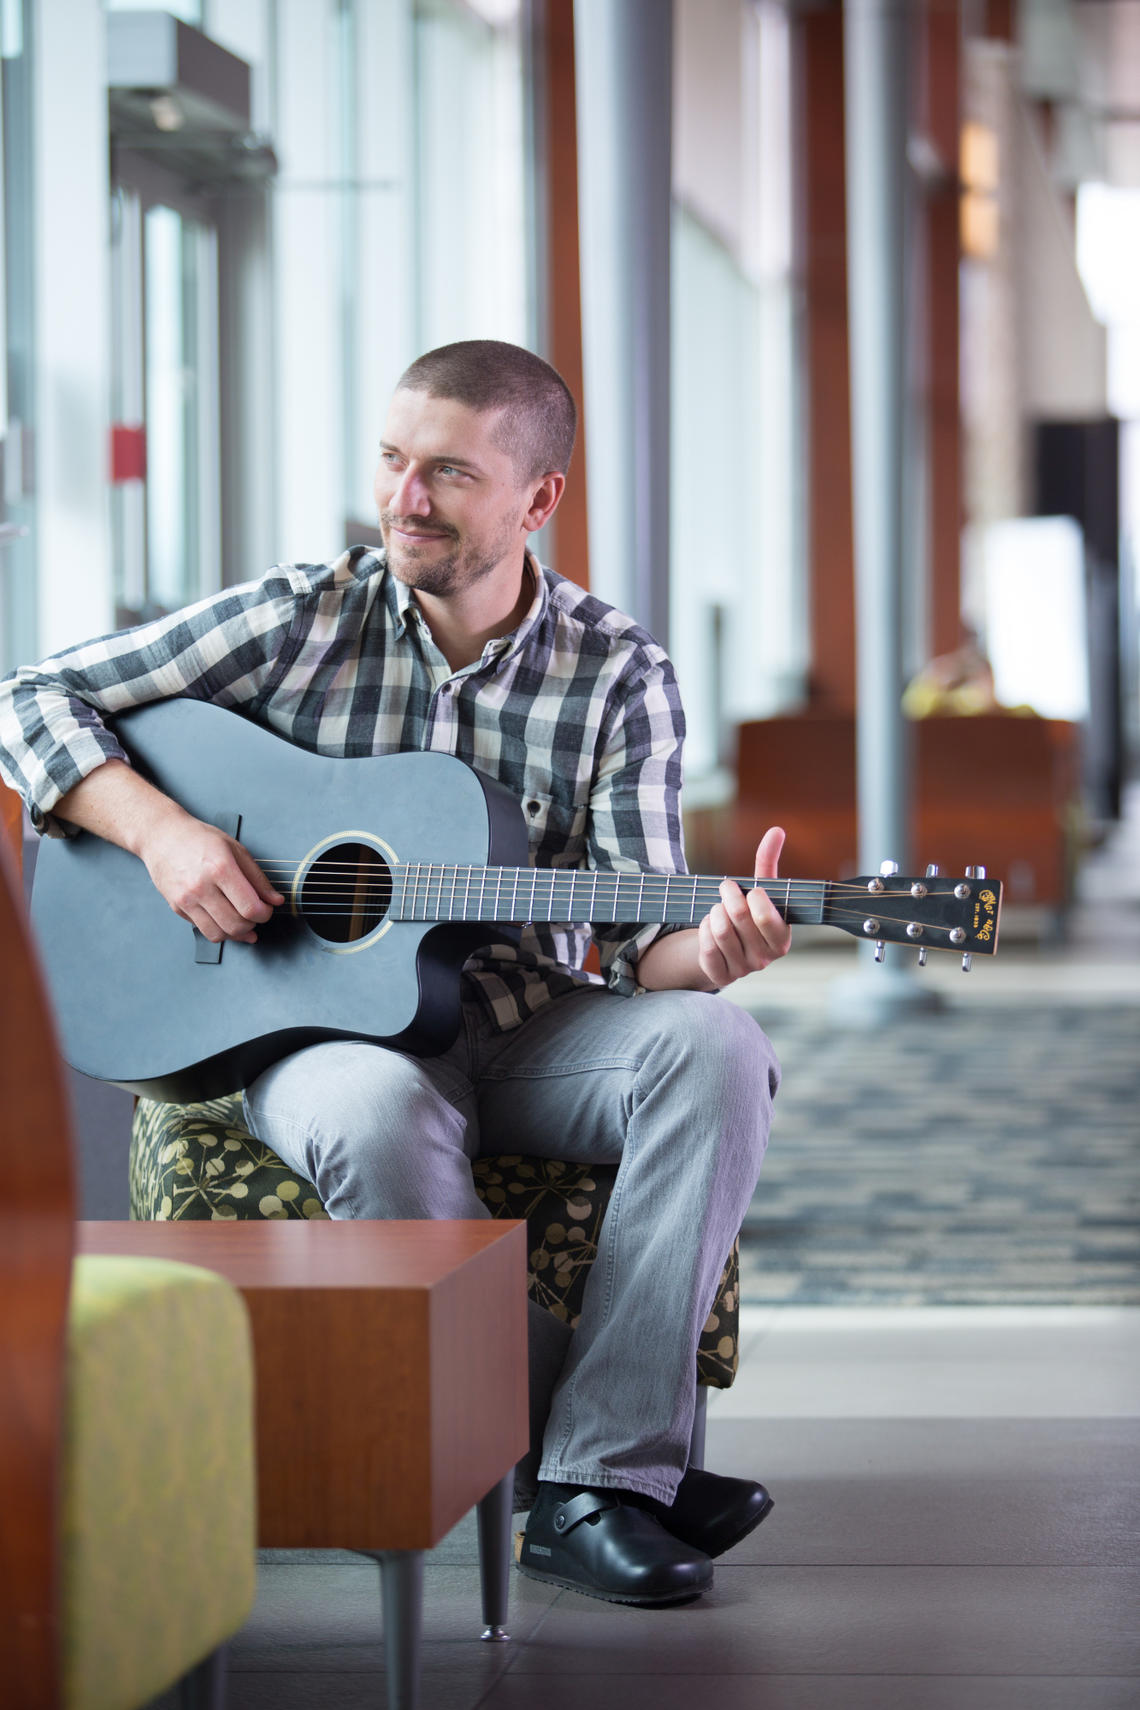 Renaissance man Dustin Anderson — who plays guitar with a med school band — graduates this spring with a PhD and an MD from the university's Leaders in Medicine program.